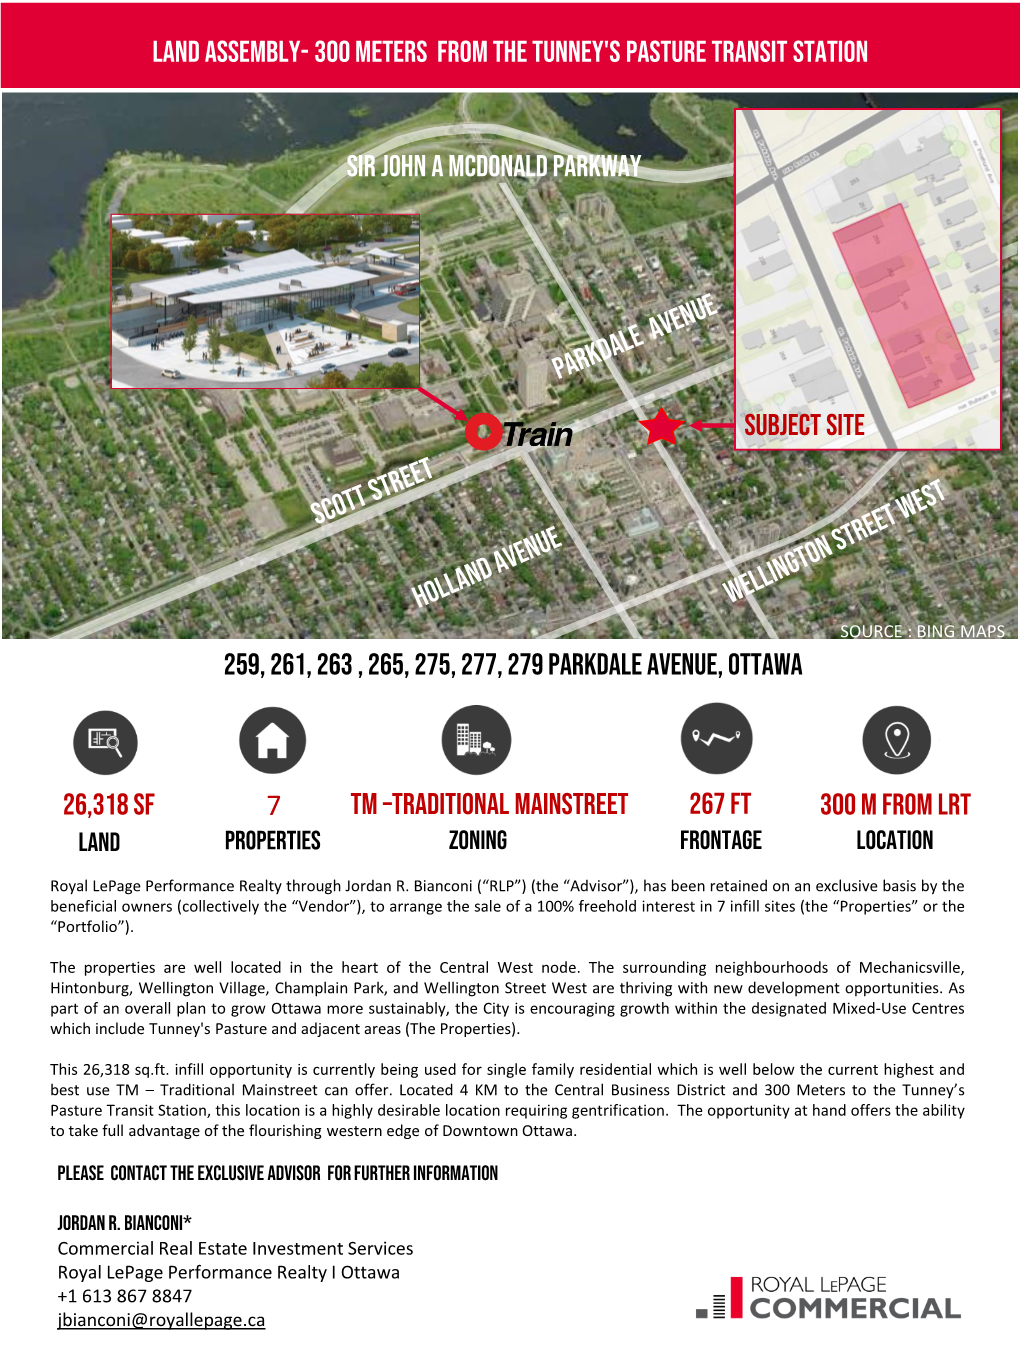 Land Assembly- 300 Meters from the Tunney's Pasture Transit Station